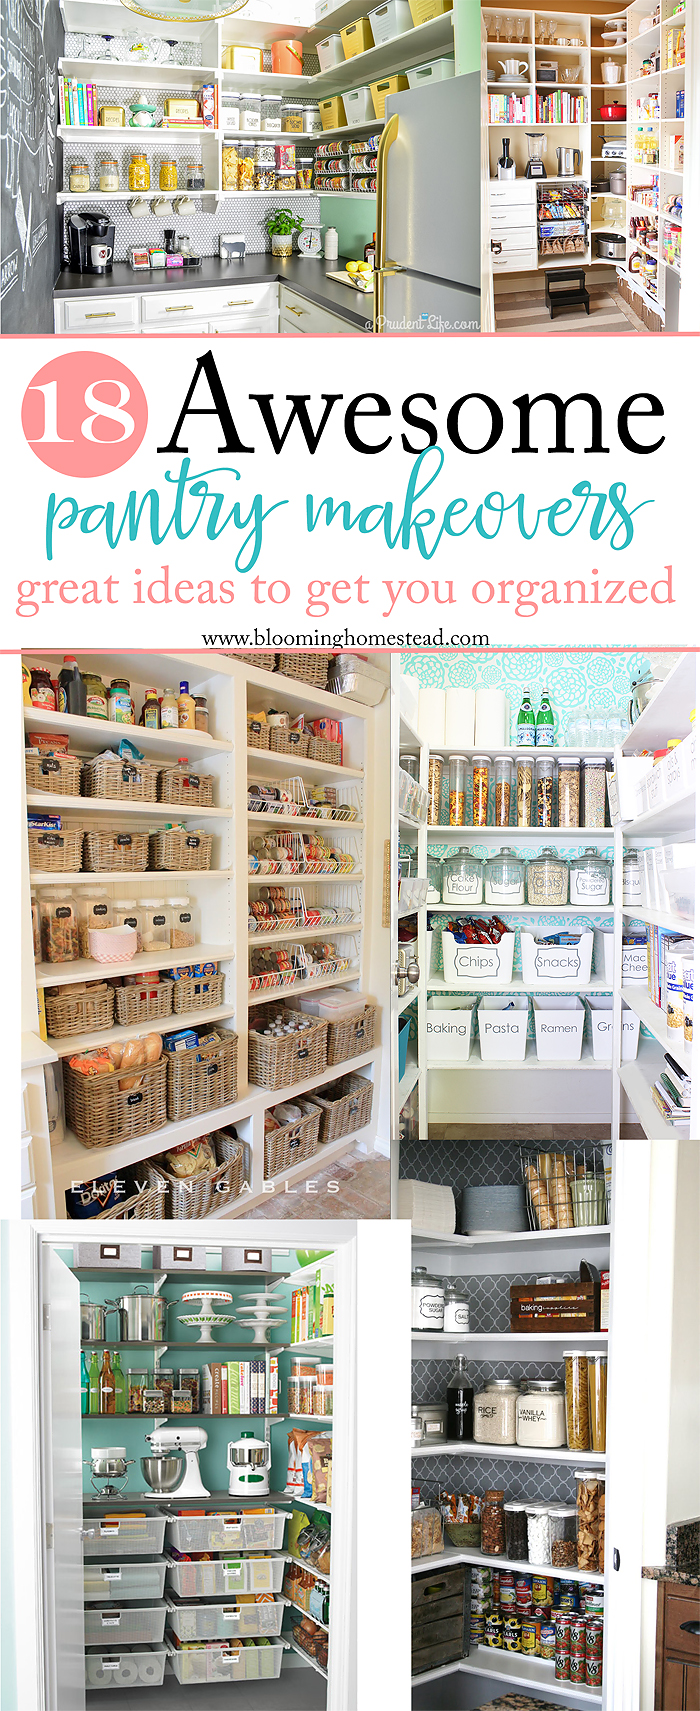 http://www.bloominghomestead.com/wp-content/uploads/2016/02/Awesome-Pantry-Makeovers-curated-by-Blooming-Homestead.jpg